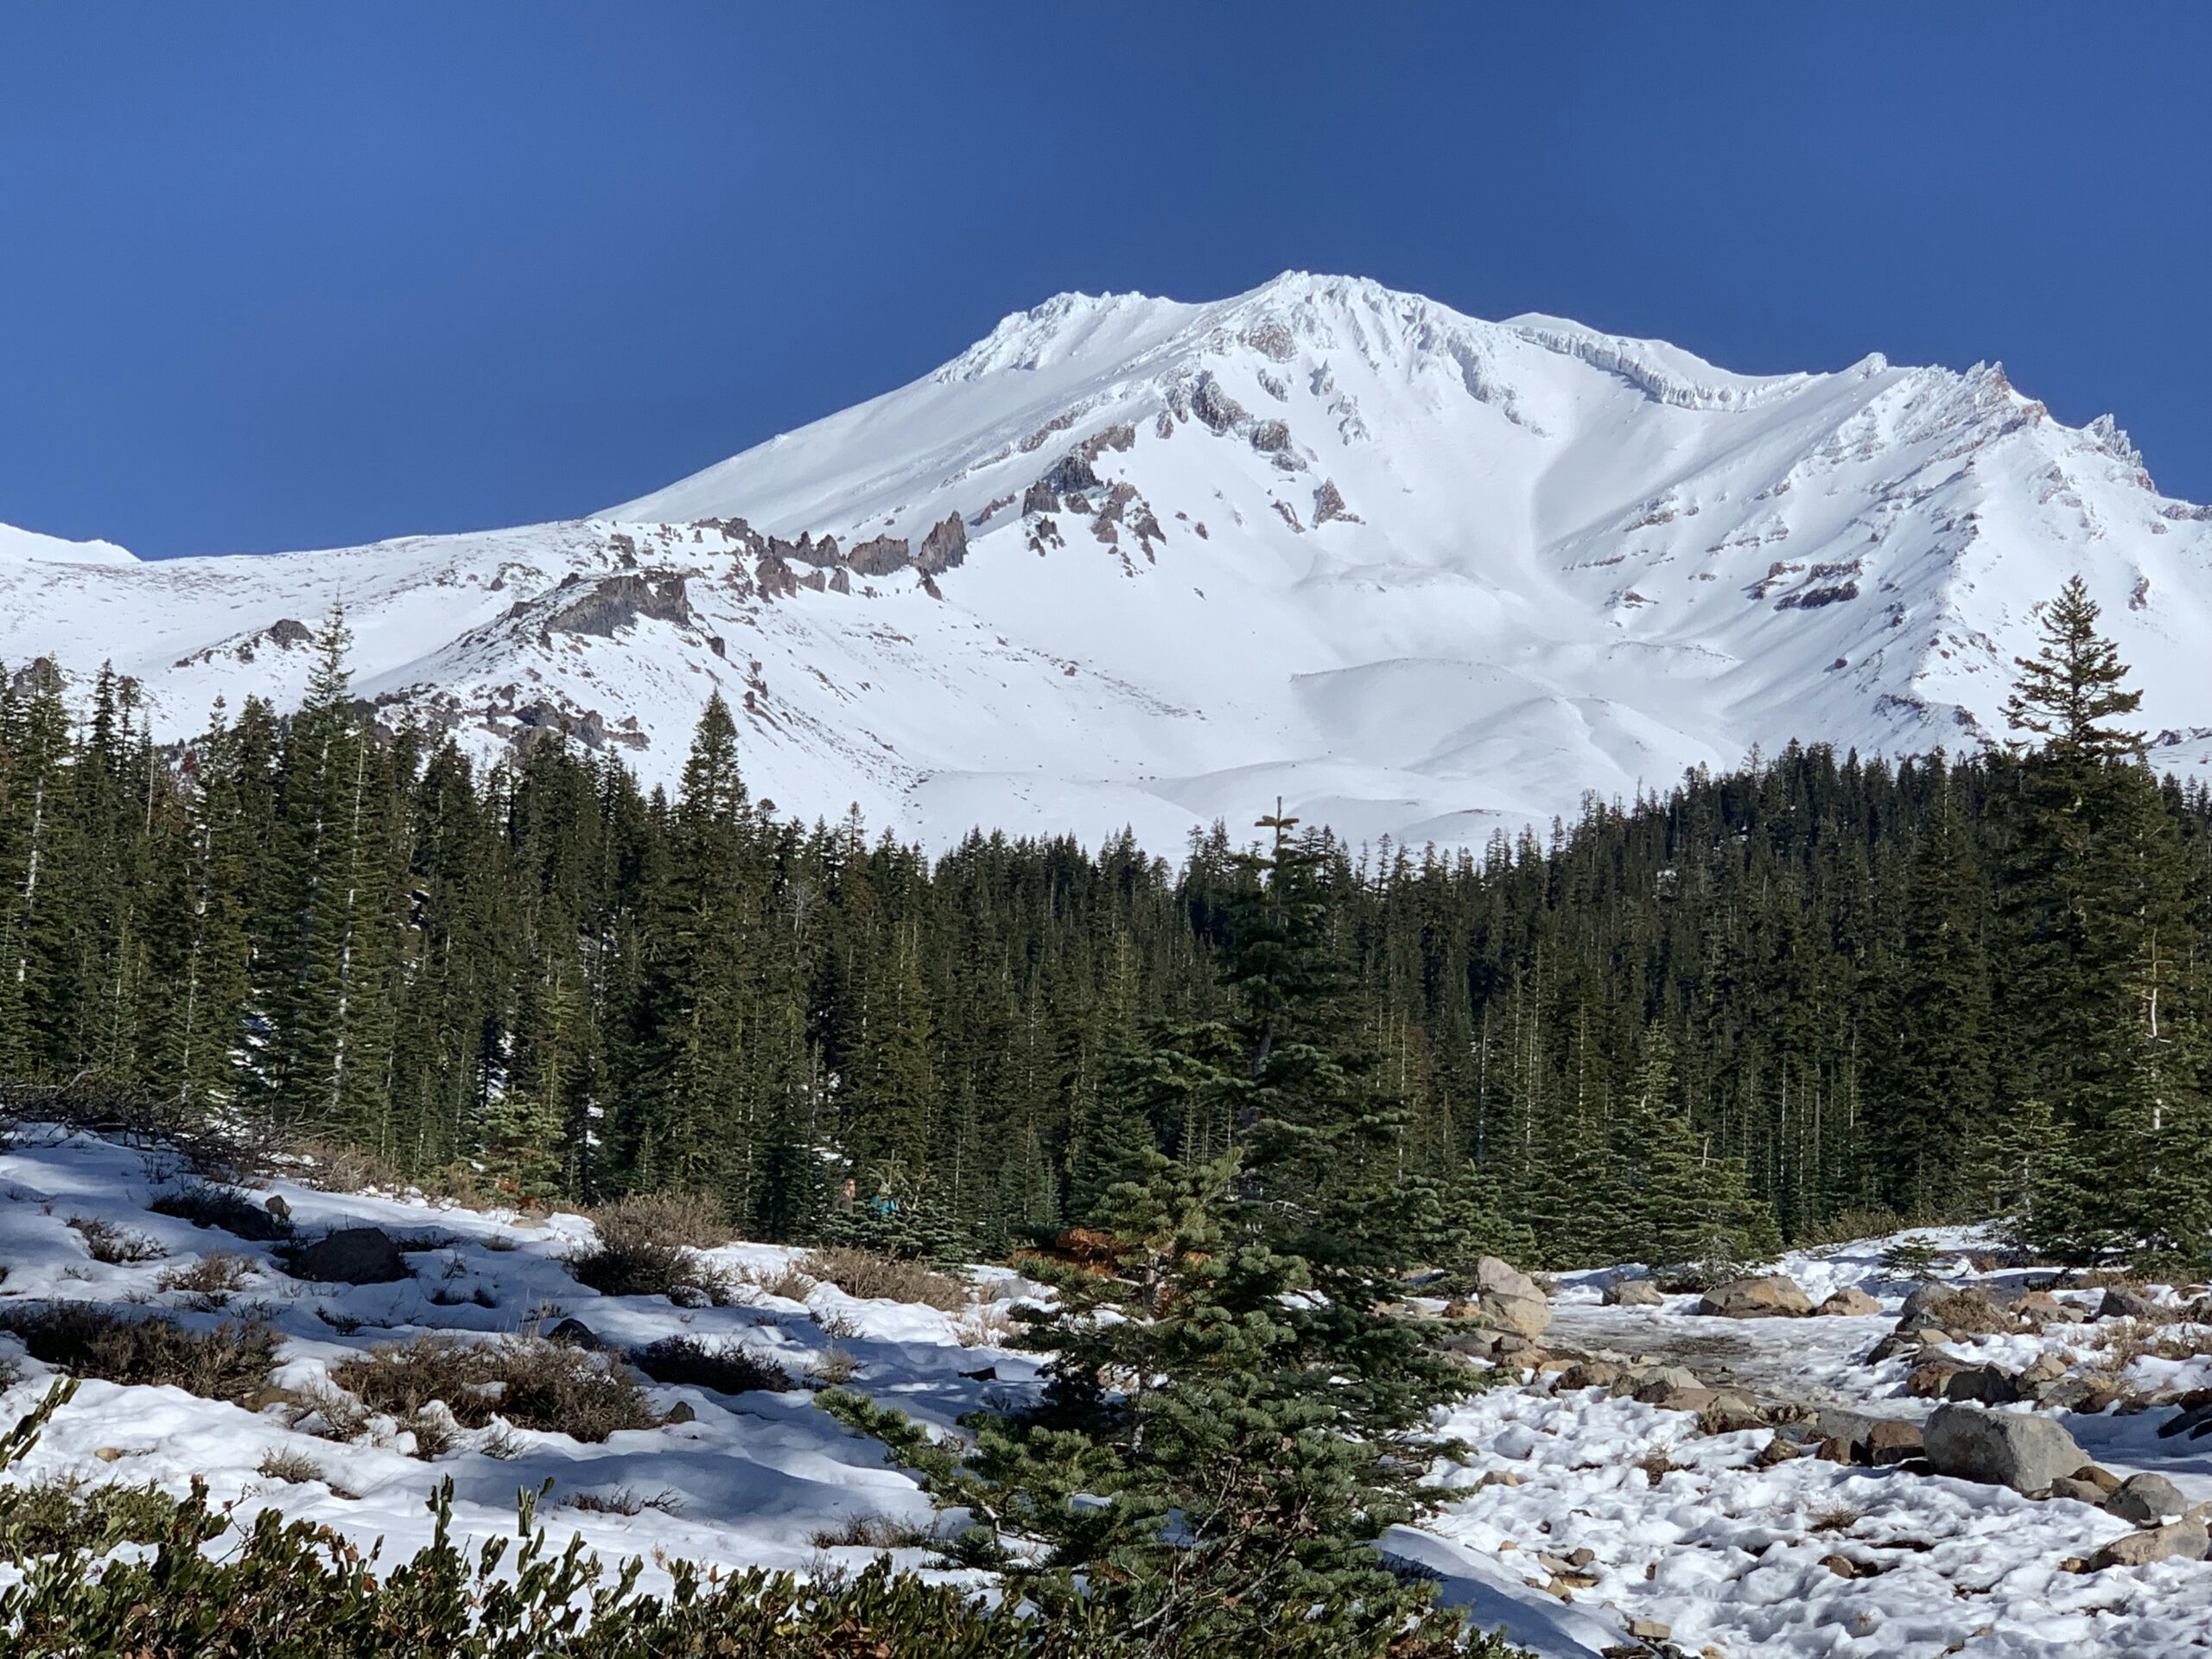 Are There Any Camping Gear Rental Shops Near Mount Shasta?